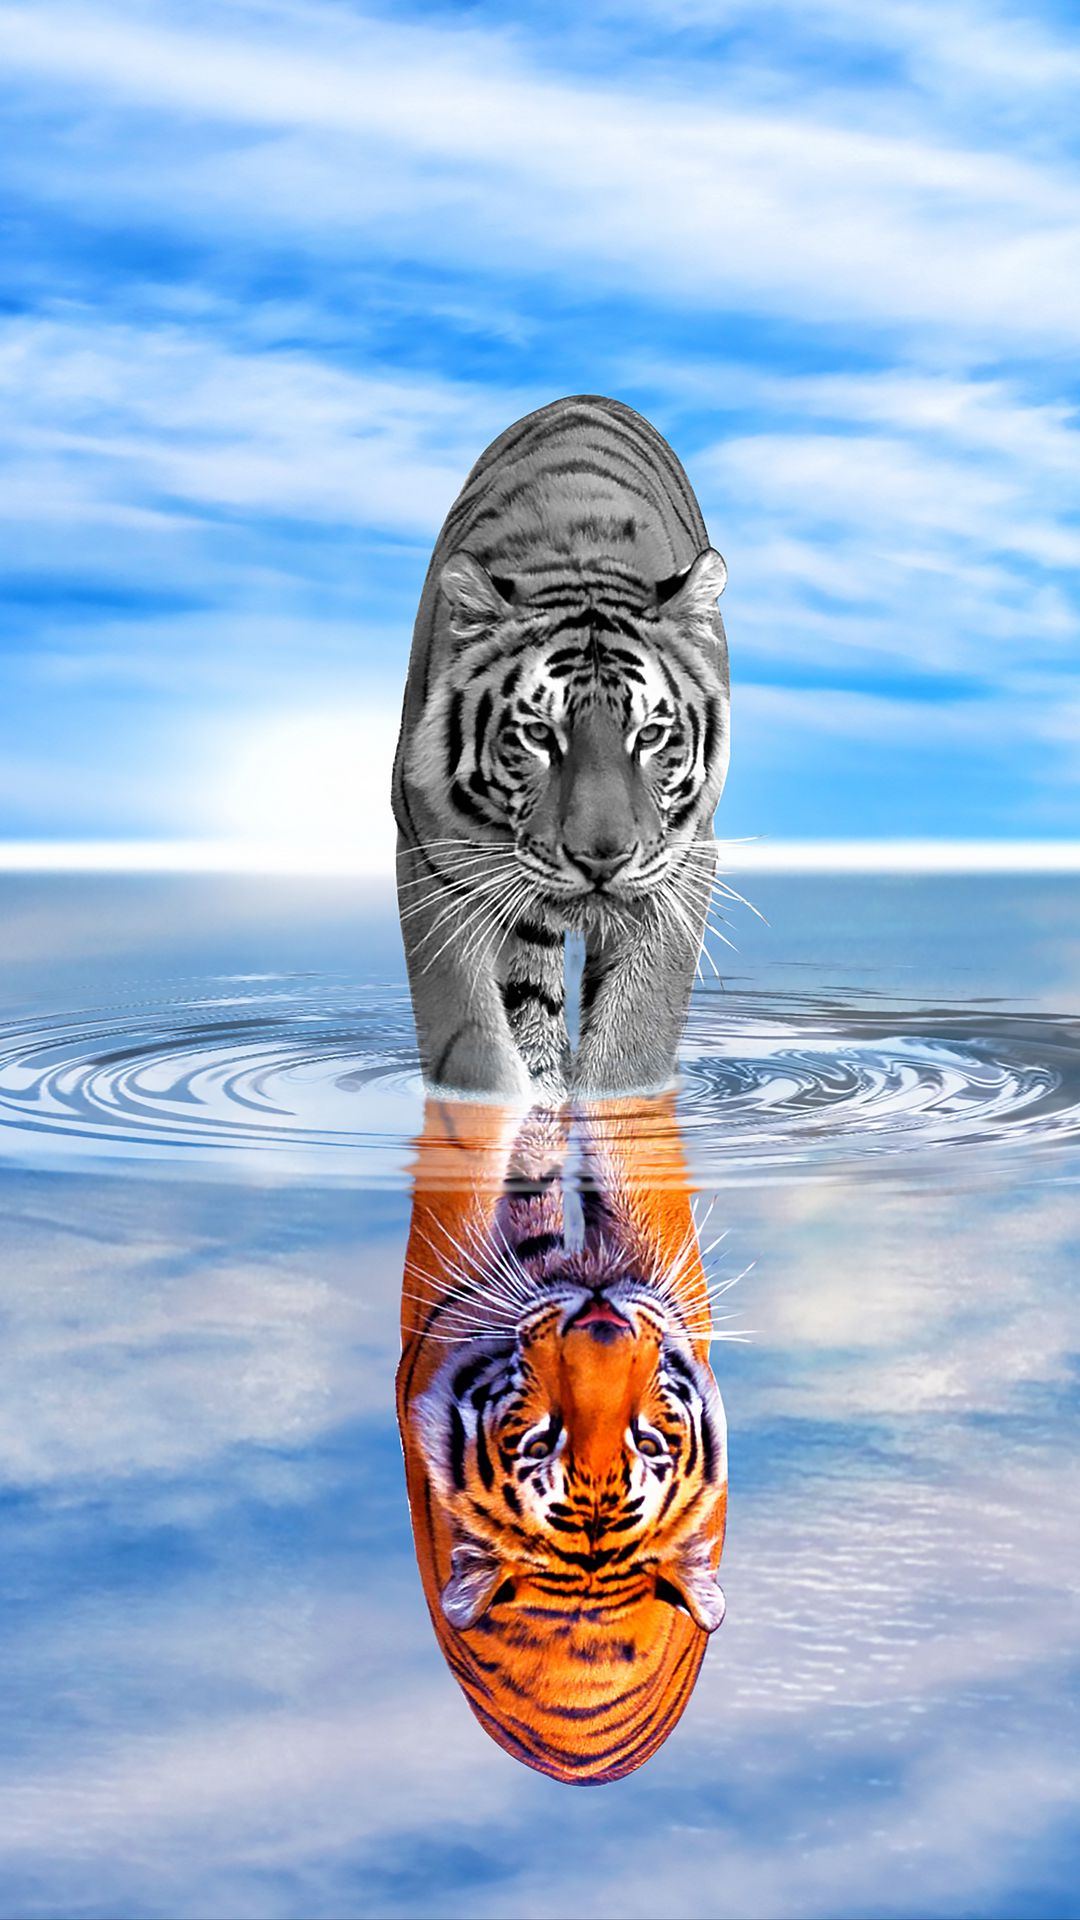 Download wallpaper 1080x1920 tiger, water, reflection, color, black and  white, sky, wave, photoshop samsung galaxy s4, s5, note, sony xperia z, z1,  z2, z3, htc one, lenovo vibe hd background